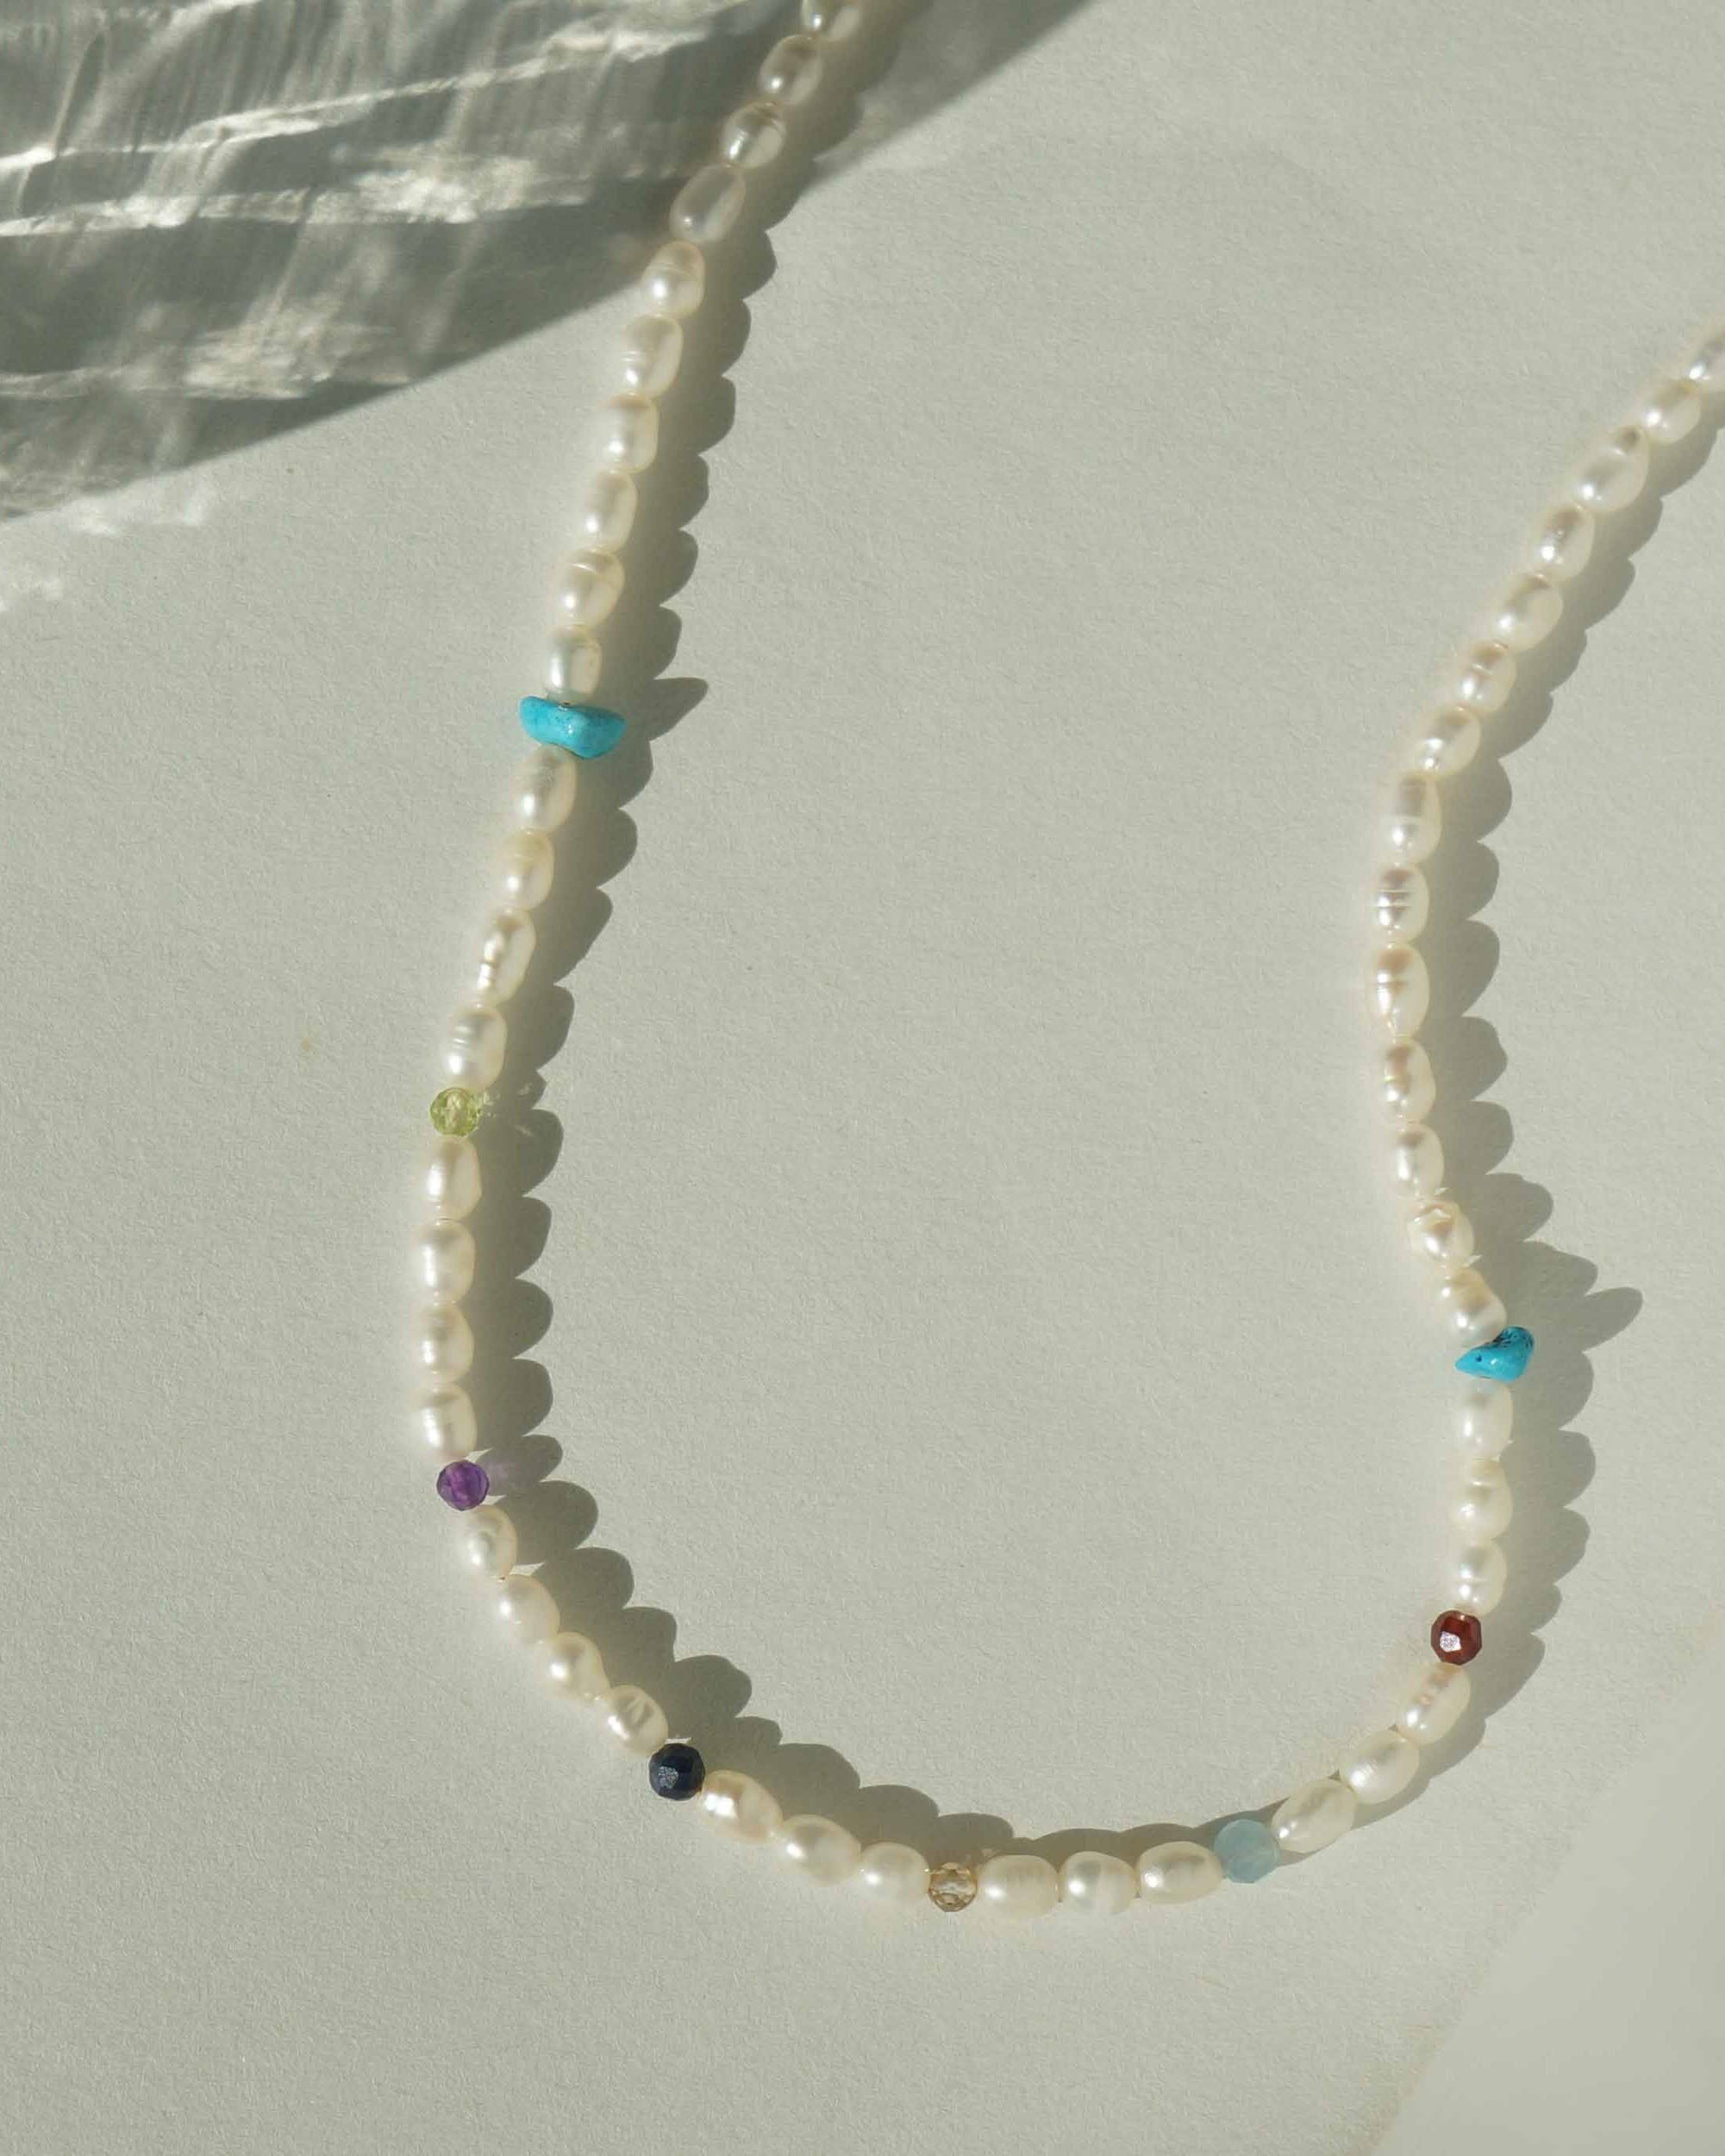 Zulema Necklace by KOZAKH. A 16 to 18 inch adjustable length, freshwater rice pearl strand necklace, clasp crafted in 14K Gold Filled, featuring Turquoise, Peridot, Sapphire, Topaz, Garnet, Aquamarine, and Amethyst gemstones.